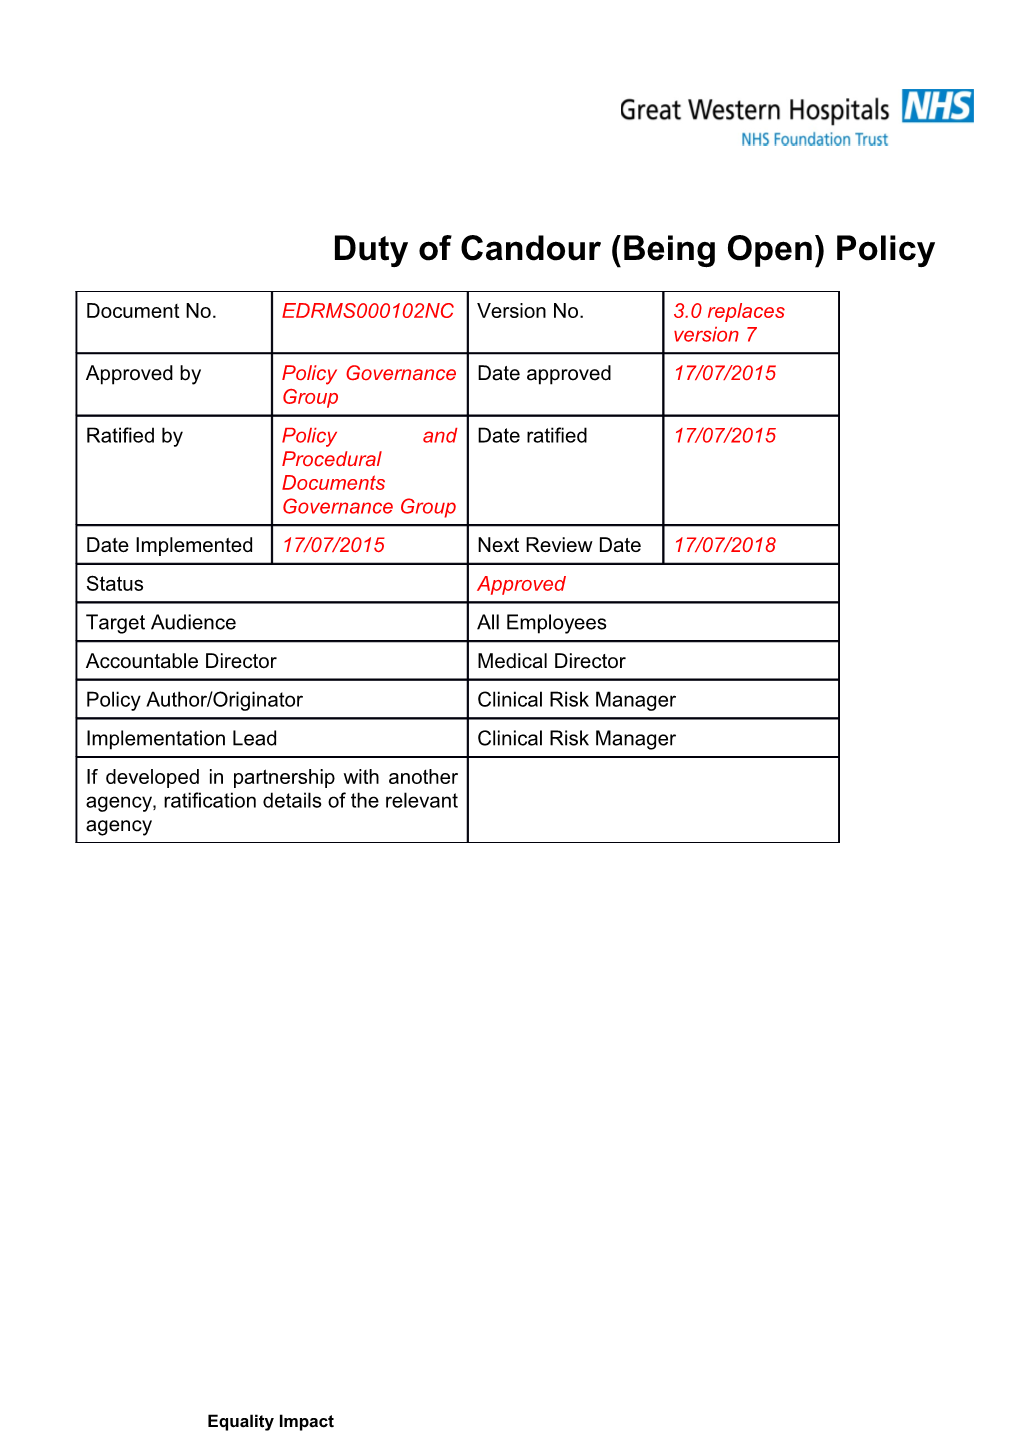 Duty of Candour (Being Open) Policy